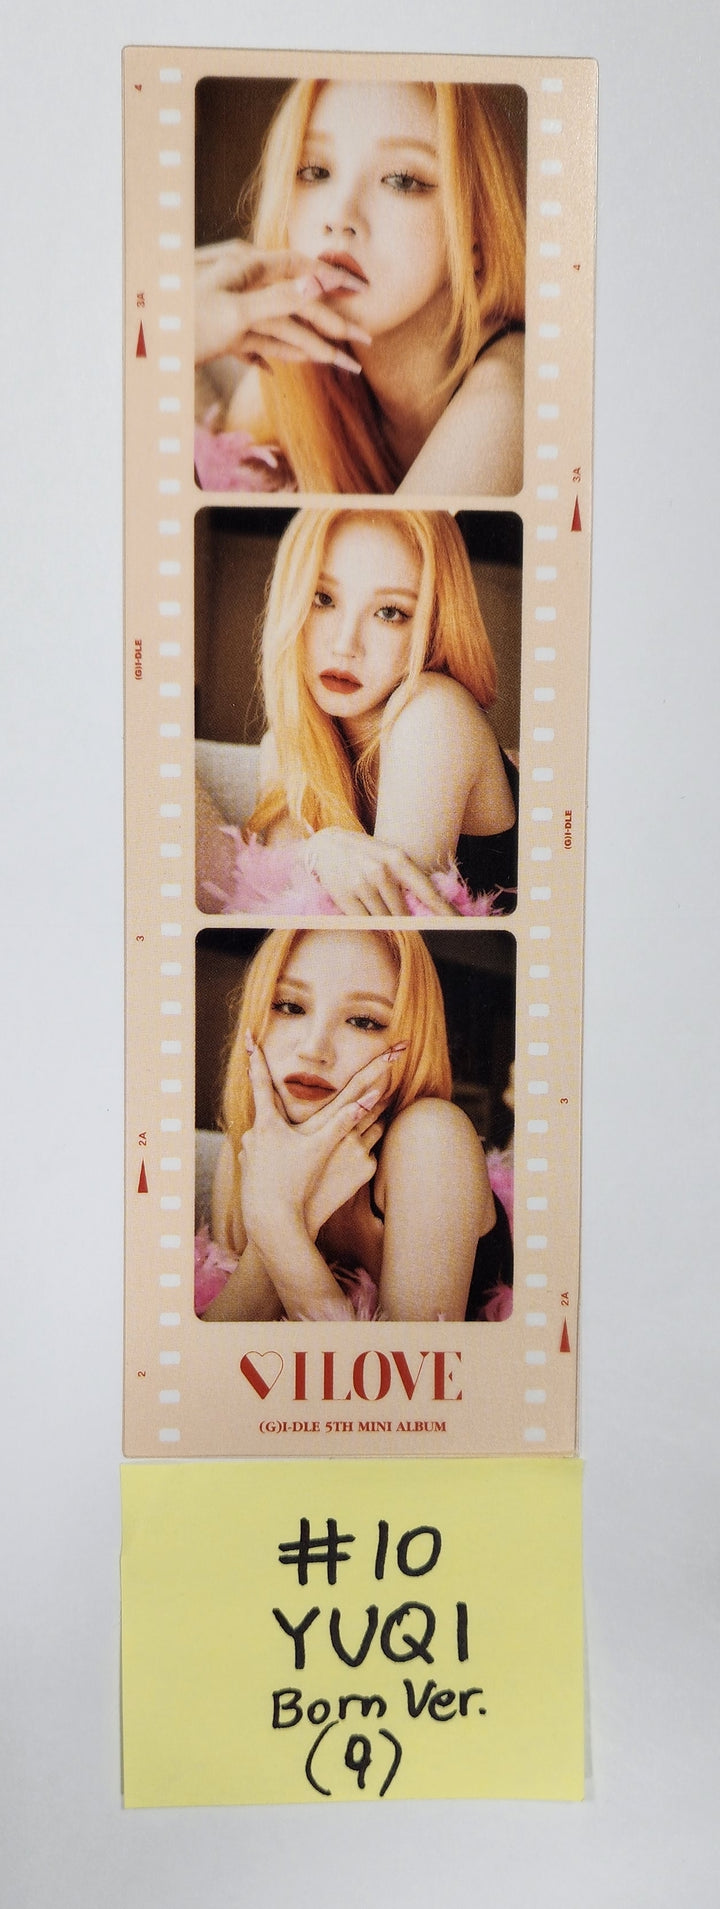 (g) I-DLE "I LOVE" - Official Bookmark, Mini Poster